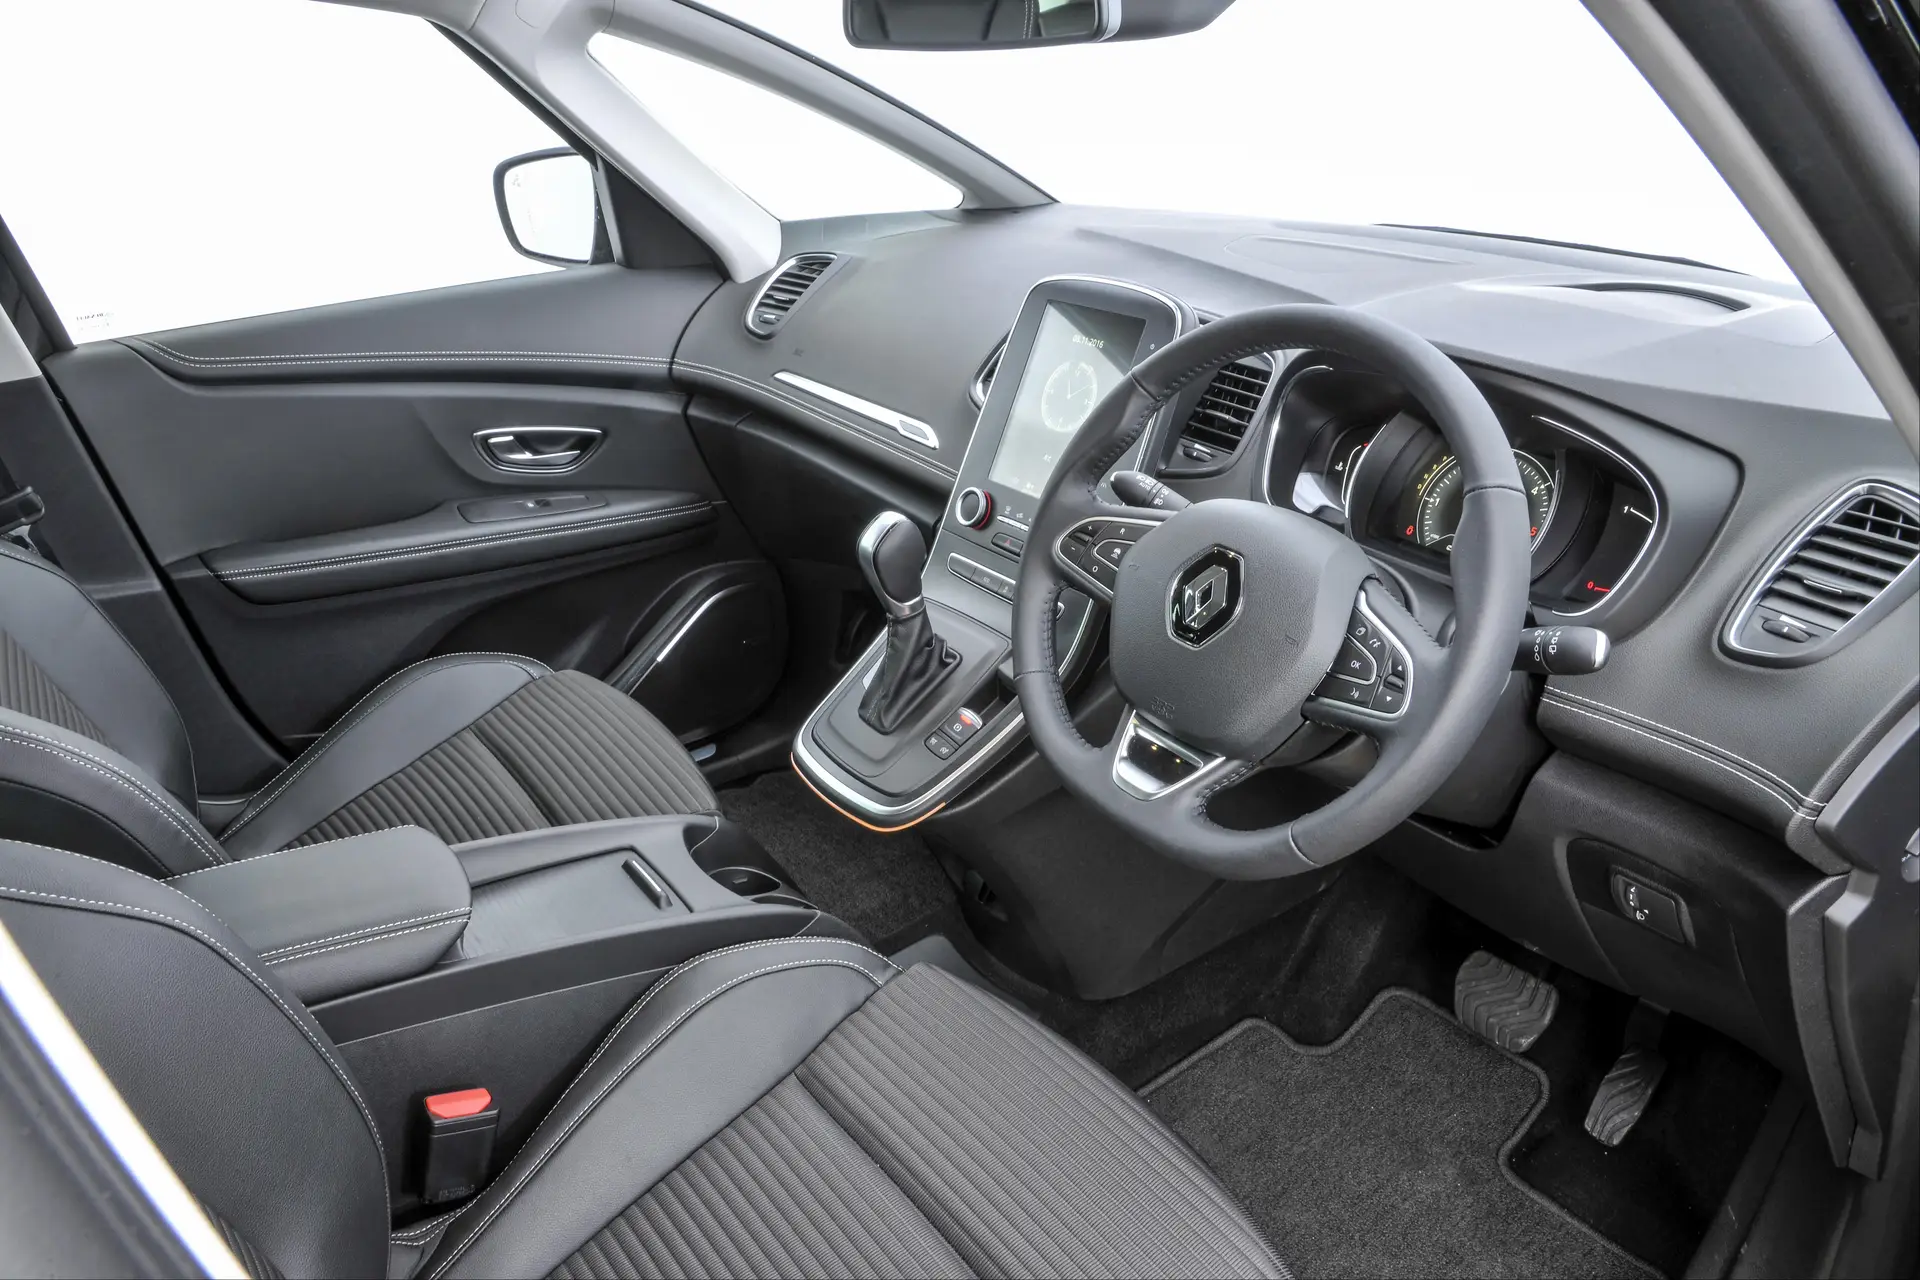 Renault Grand Scenic (2016-2002) Review: interior close up photo of the Renault Grand Scenic dashboard